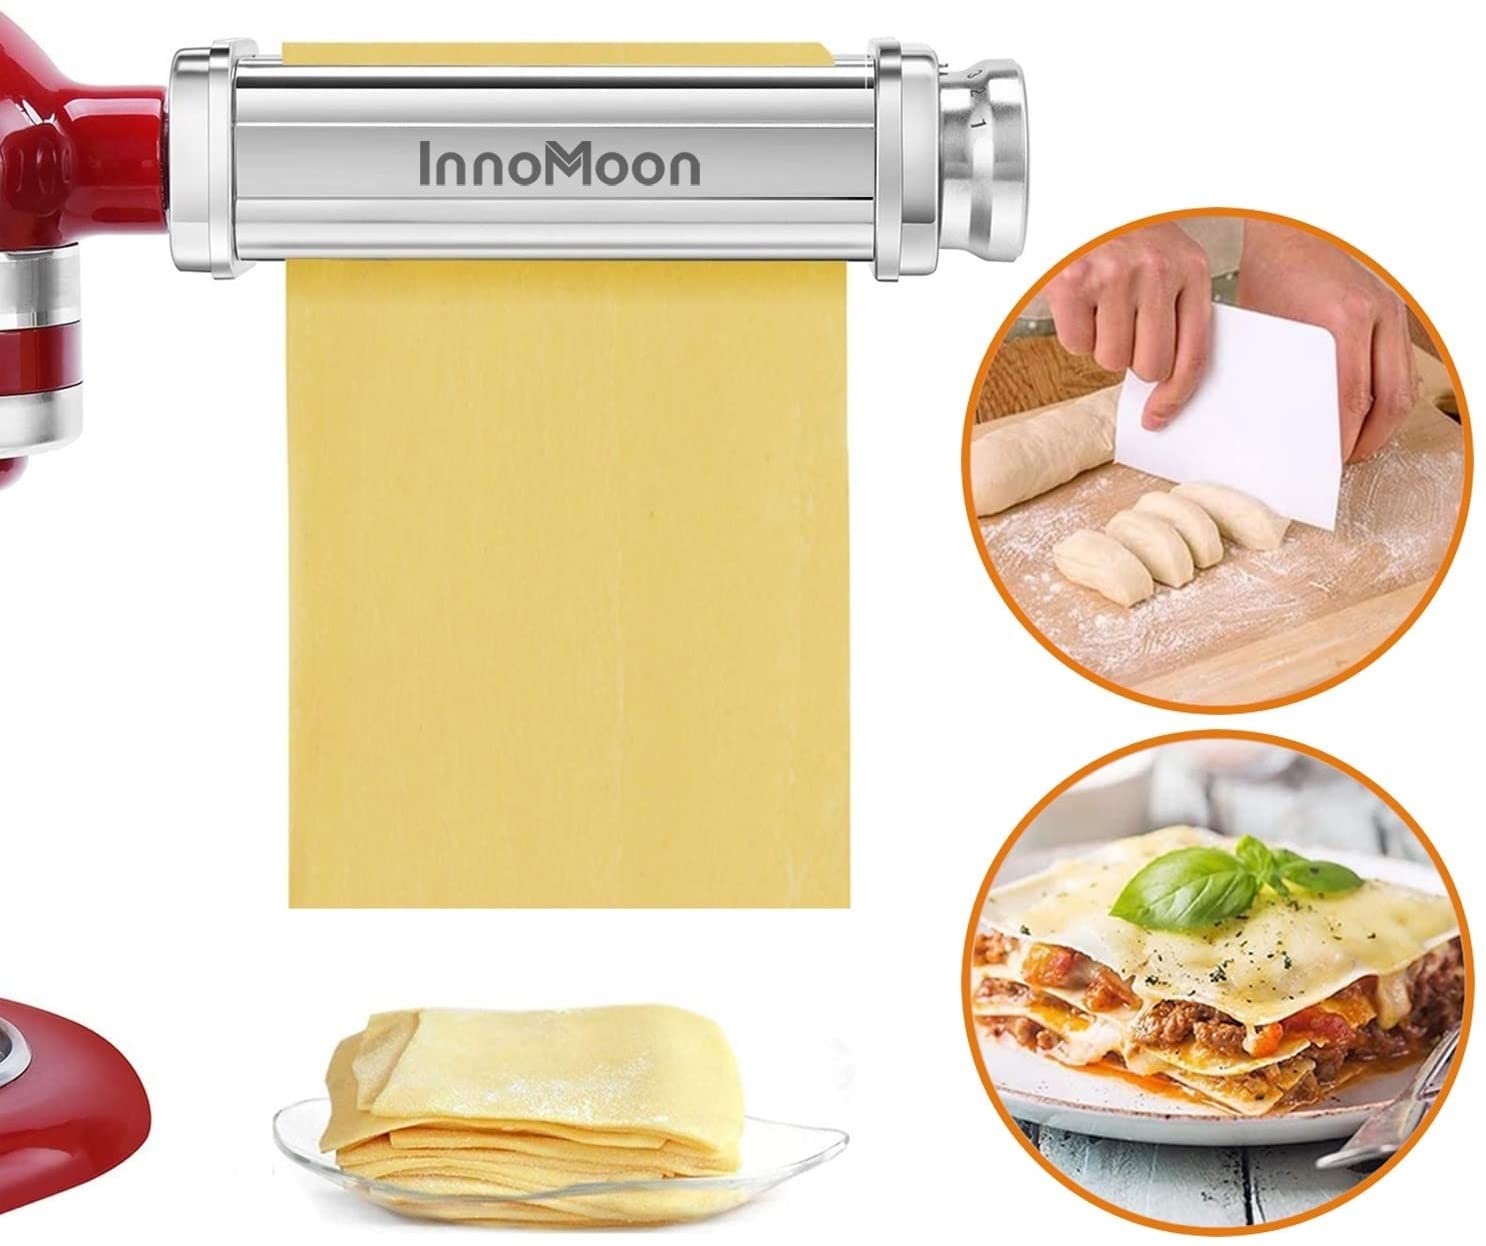 InnoMoon Pasta Roller Attachment for KitchenAid Stand Mixer, Stainless Steel Pasta Sheet Maker Accessories Plus Dough Scraper as a Gift